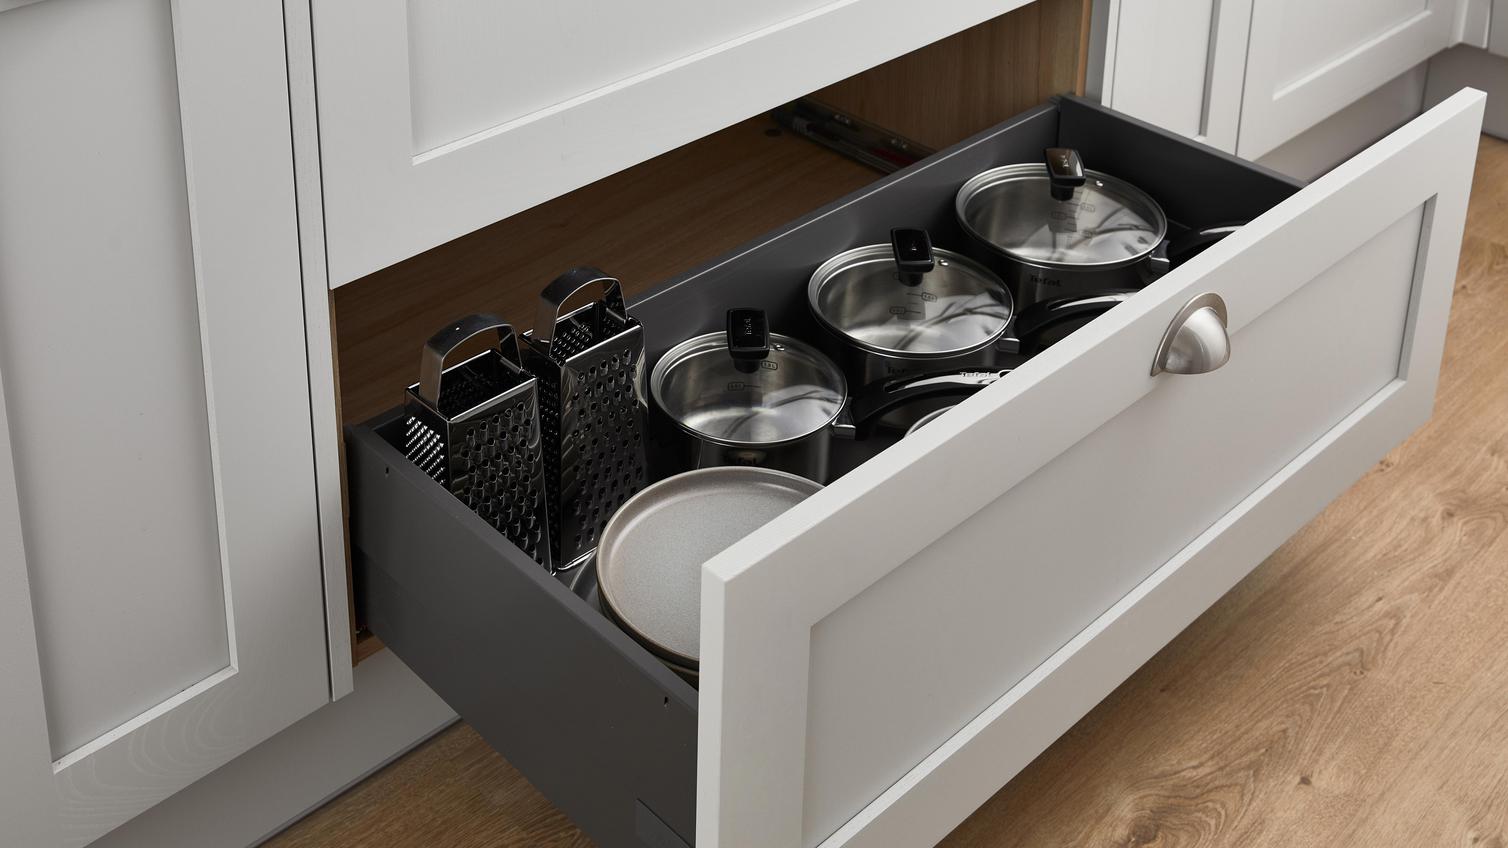 A pull-out draw, with a deep capacity, housing cooking pots and utensils